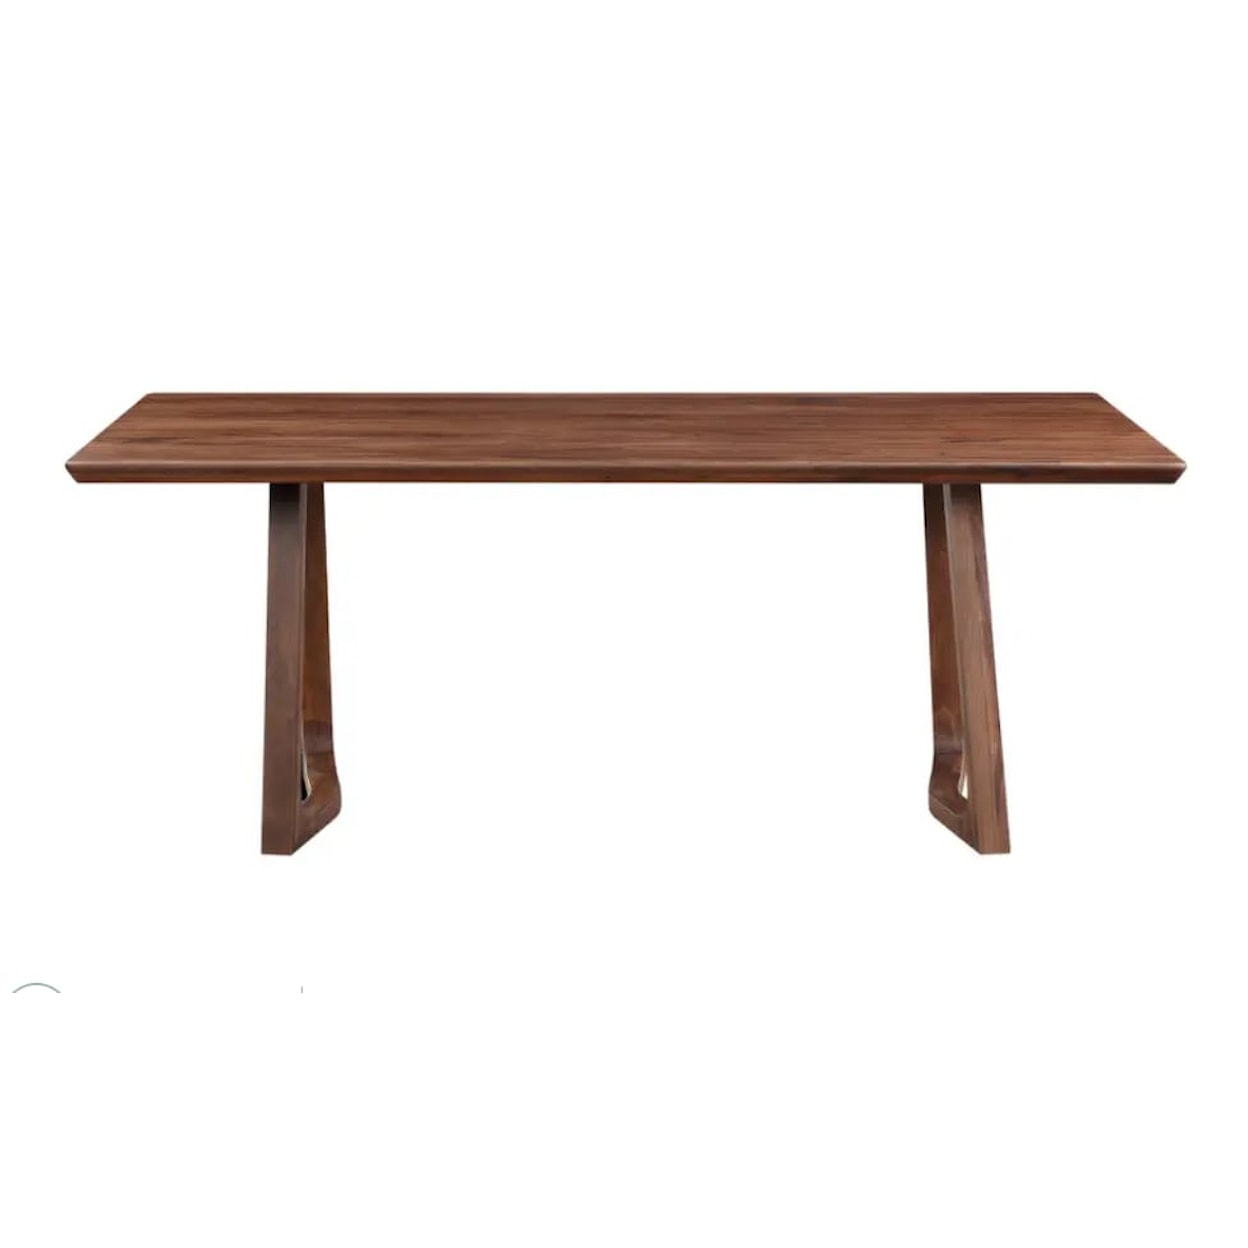 Moe's Home Collection Silas Rectangular Solid Walnut Dining Table